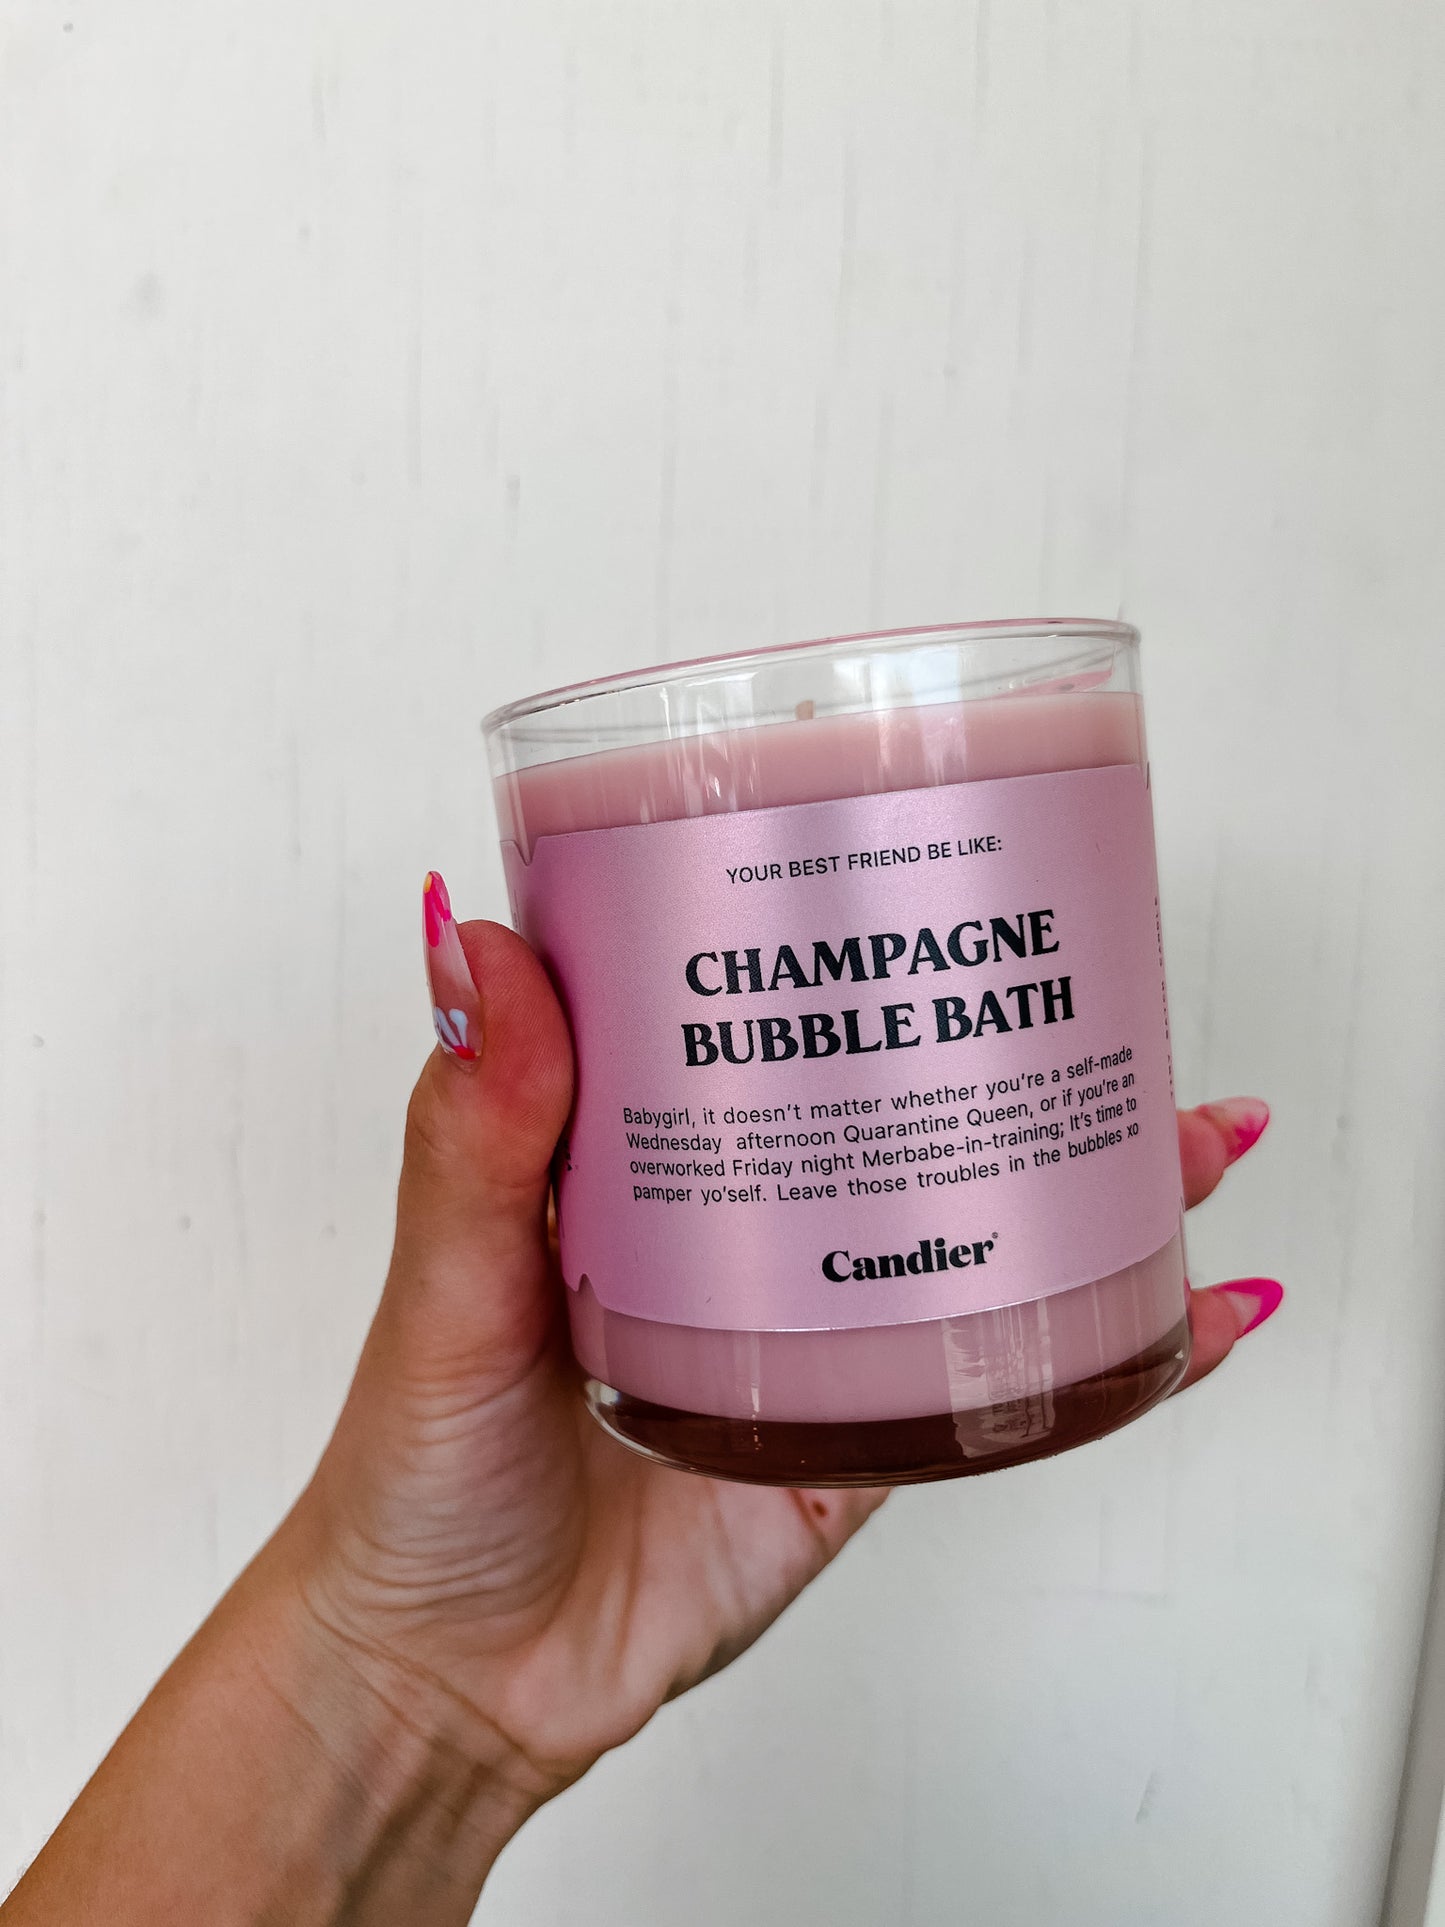 Champagne Bubble Bath Candle by Candier